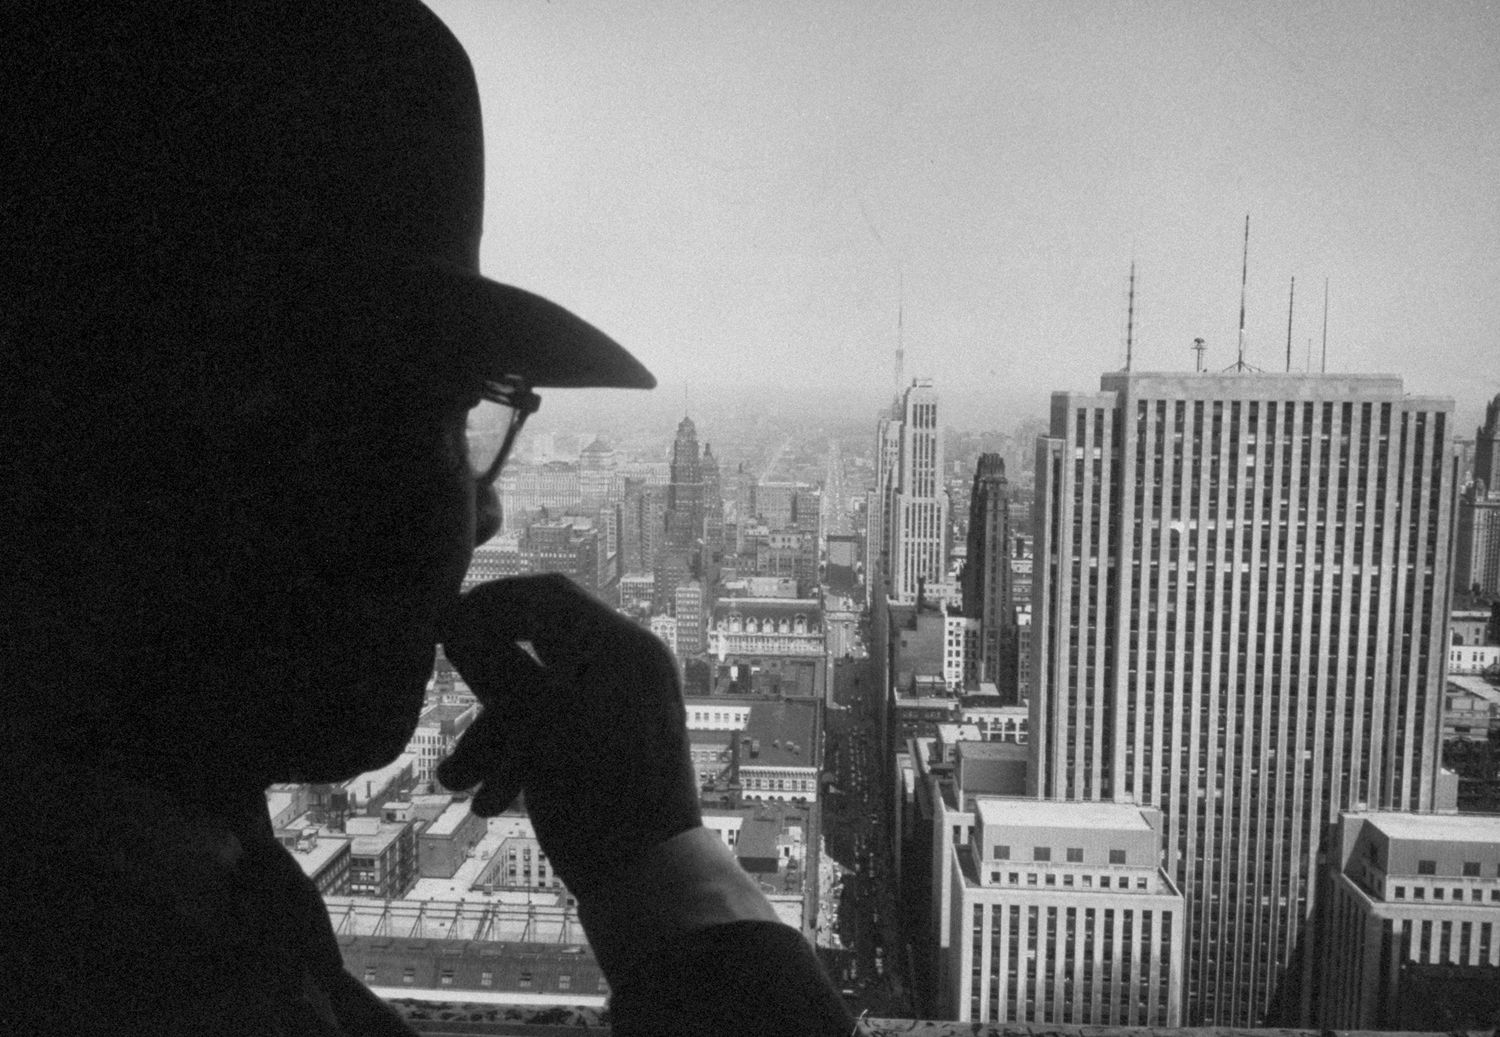 Poet Carl Sandburg looks out a window in the Chicago Board of Trade Building, 1957.